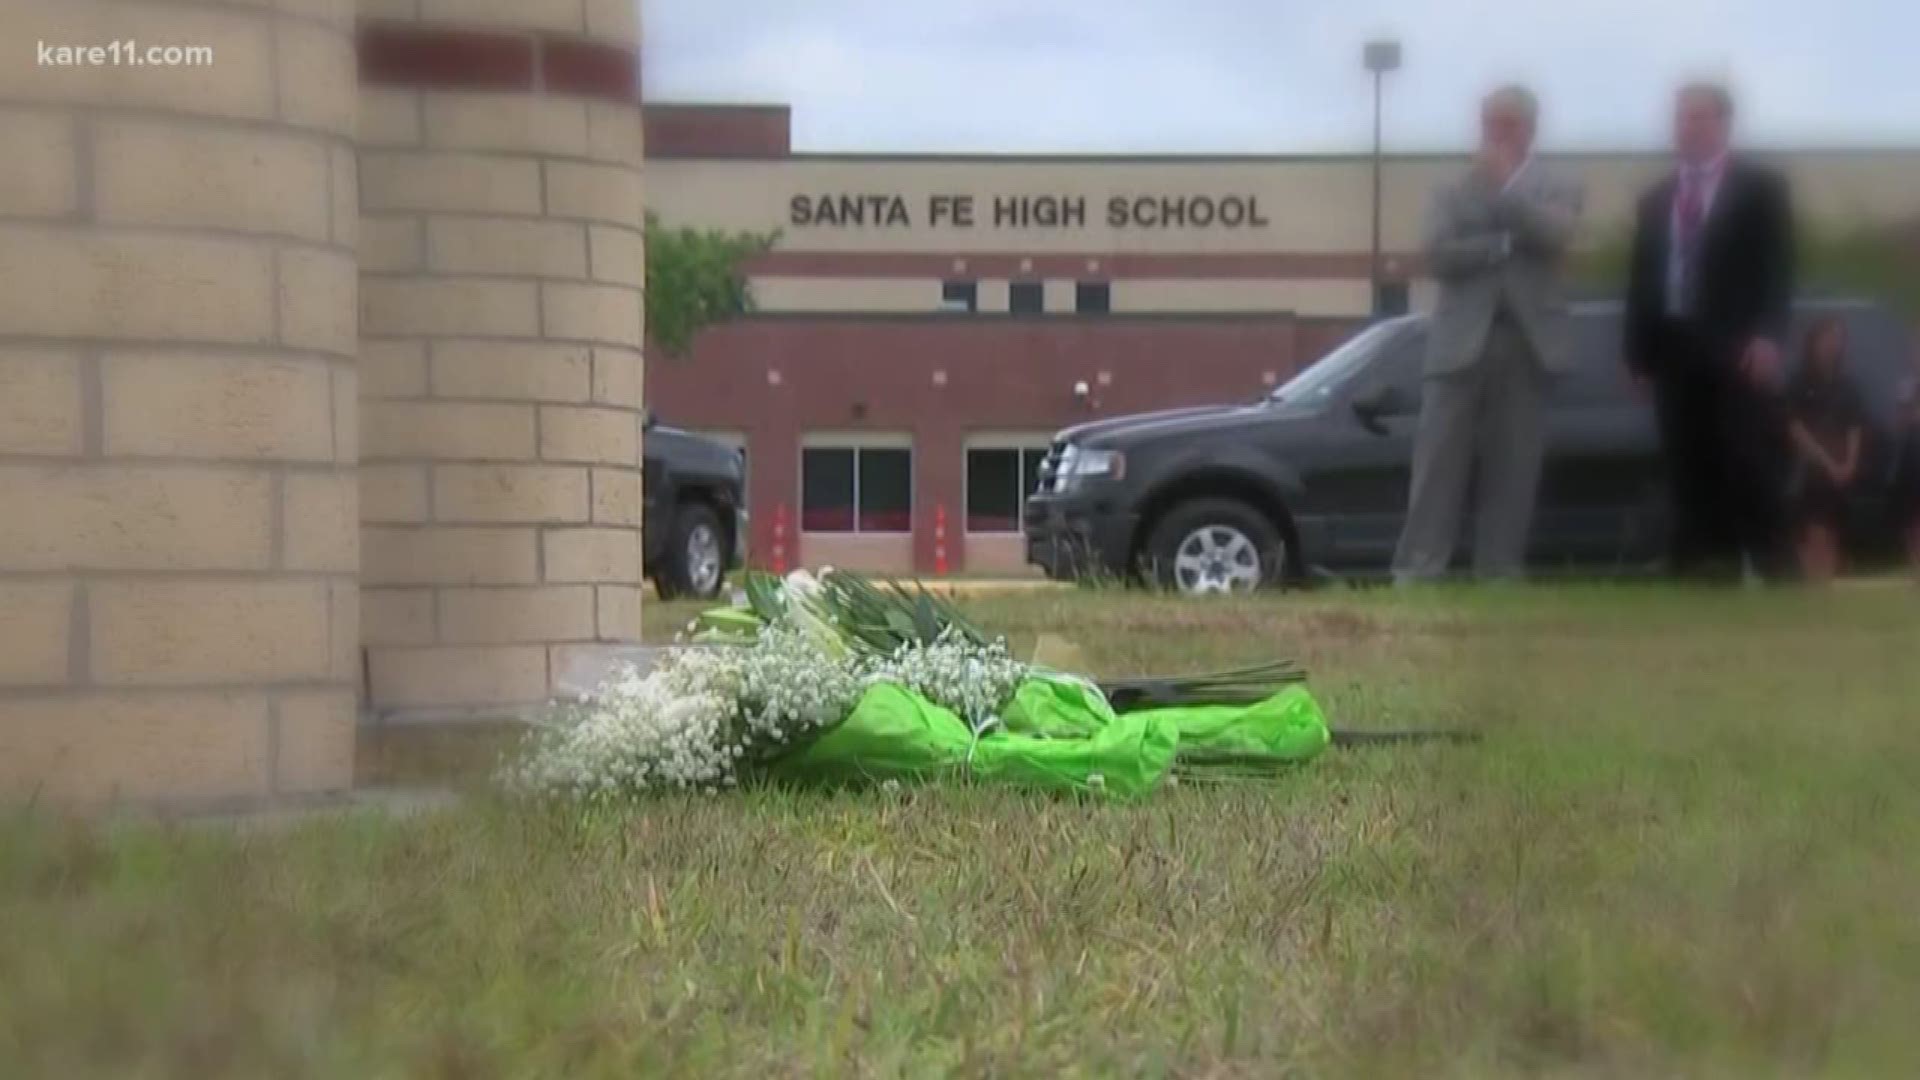 The community is searching for answers after a 17-year-old Texas high school student allegedly killed 10 people in a school shooting Friday. https://kare11.tv/2rZ5yyY